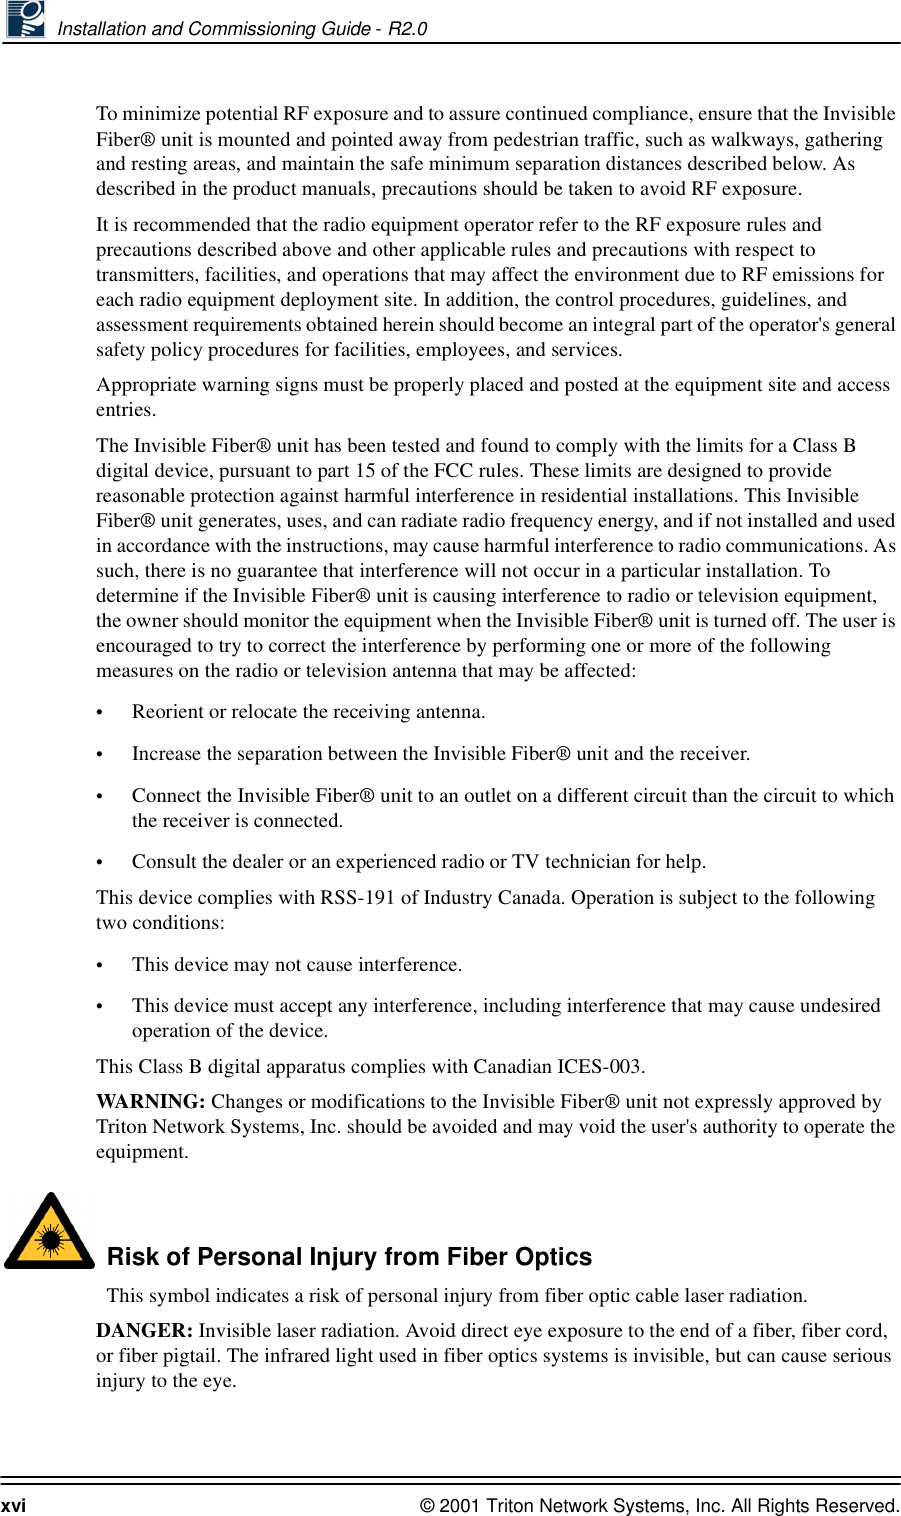  Installation and Commissioning Guide - R2.0xvi © 2001 Triton Network Systems, Inc. All Rights Reserved.To minimize potential RF exposure and to assure continued compliance, ensure that the Invisible Fiber® unit is mounted and pointed away from pedestrian traffic, such as walkways, gathering and resting areas, and maintain the safe minimum separation distances described below. As described in the product manuals, precautions should be taken to avoid RF exposure.It is recommended that the radio equipment operator refer to the RF exposure rules and precautions described above and other applicable rules and precautions with respect to transmitters, facilities, and operations that may affect the environment due to RF emissions for each radio equipment deployment site. In addition, the control procedures, guidelines, and assessment requirements obtained herein should become an integral part of the operator&apos;s general safety policy procedures for facilities, employees, and services. Appropriate warning signs must be properly placed and posted at the equipment site and access entries.The Invisible Fiber® unit has been tested and found to comply with the limits for a Class B digital device, pursuant to part 15 of the FCC rules. These limits are designed to provide reasonable protection against harmful interference in residential installations. This Invisible Fiber® unit generates, uses, and can radiate radio frequency energy, and if not installed and used in accordance with the instructions, may cause harmful interference to radio communications. As such, there is no guarantee that interference will not occur in a particular installation. To determine if the Invisible Fiber® unit is causing interference to radio or television equipment, the owner should monitor the equipment when the Invisible Fiber® unit is turned off. The user is encouraged to try to correct the interference by performing one or more of the following measures on the radio or television antenna that may be affected:•Reorient or relocate the receiving antenna.•Increase the separation between the Invisible Fiber® unit and the receiver.•Connect the Invisible Fiber® unit to an outlet on a different circuit than the circuit to which the receiver is connected.•Consult the dealer or an experienced radio or TV technician for help.This device complies with RSS-191 of Industry Canada. Operation is subject to the following two conditions:•This device may not cause interference.•This device must accept any interference, including interference that may cause undesired operation of the device.This Class B digital apparatus complies with Canadian ICES-003.WAR N IN G:  Changes or modifications to the Invisible Fiber® unit not expressly approved by Triton Network Systems, Inc. should be avoided and may void the user&apos;s authority to operate the equipment.   Risk of Personal Injury from Fiber OpticsThis symbol indicates a risk of personal injury from fiber optic cable laser radiation.DANGER: Invisible laser radiation. Avoid direct eye exposure to the end of a fiber, fiber cord, or fiber pigtail. The infrared light used in fiber optics systems is invisible, but can cause serious injury to the eye.